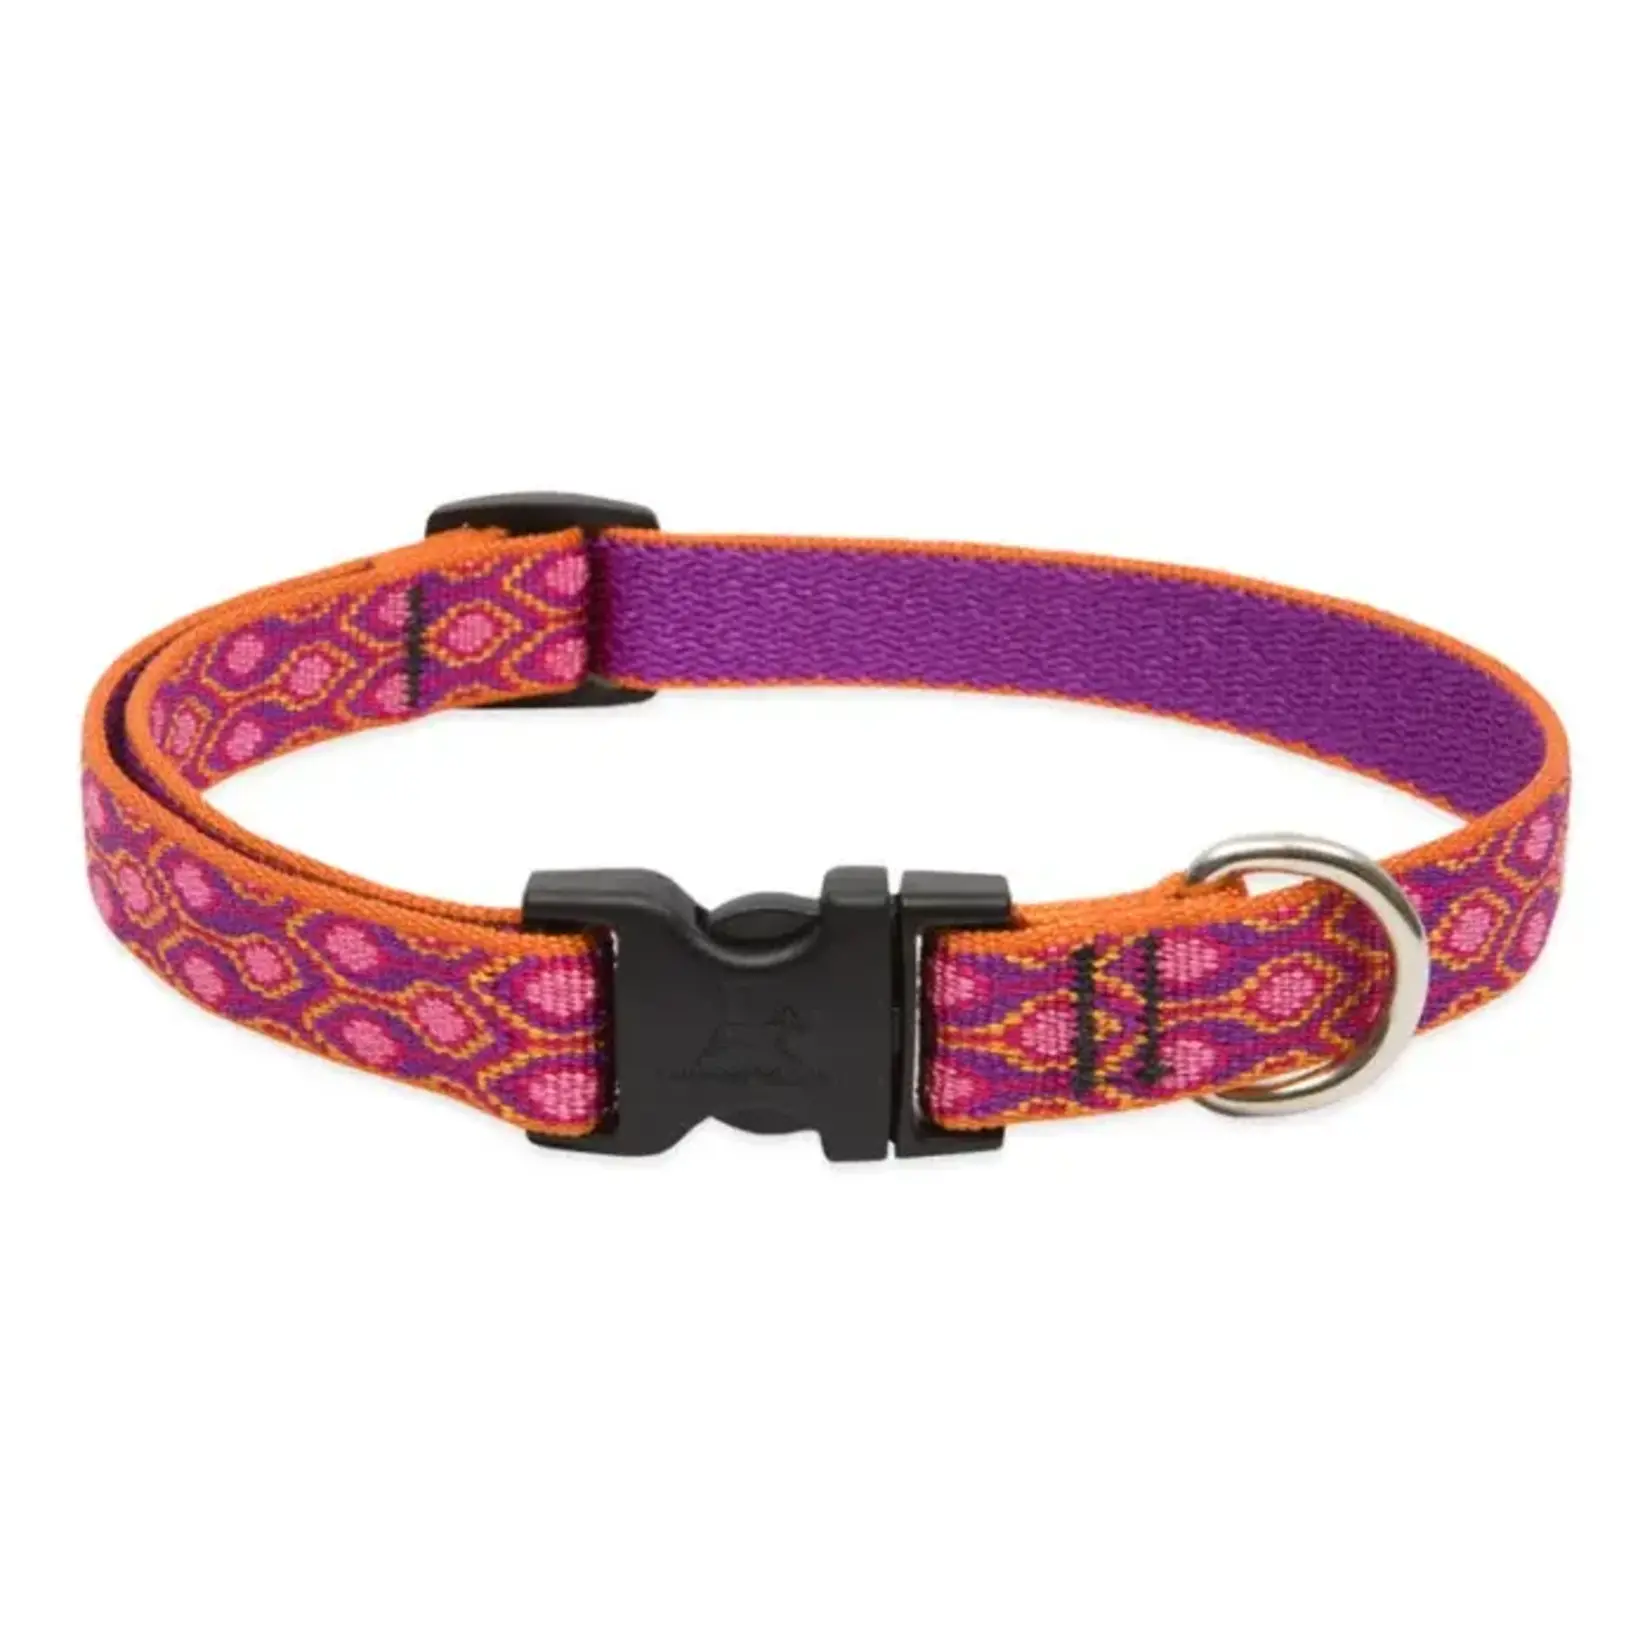 Lupine Lupine Alpen Glow 3/4 in x 9-14 in Adjustable Collar